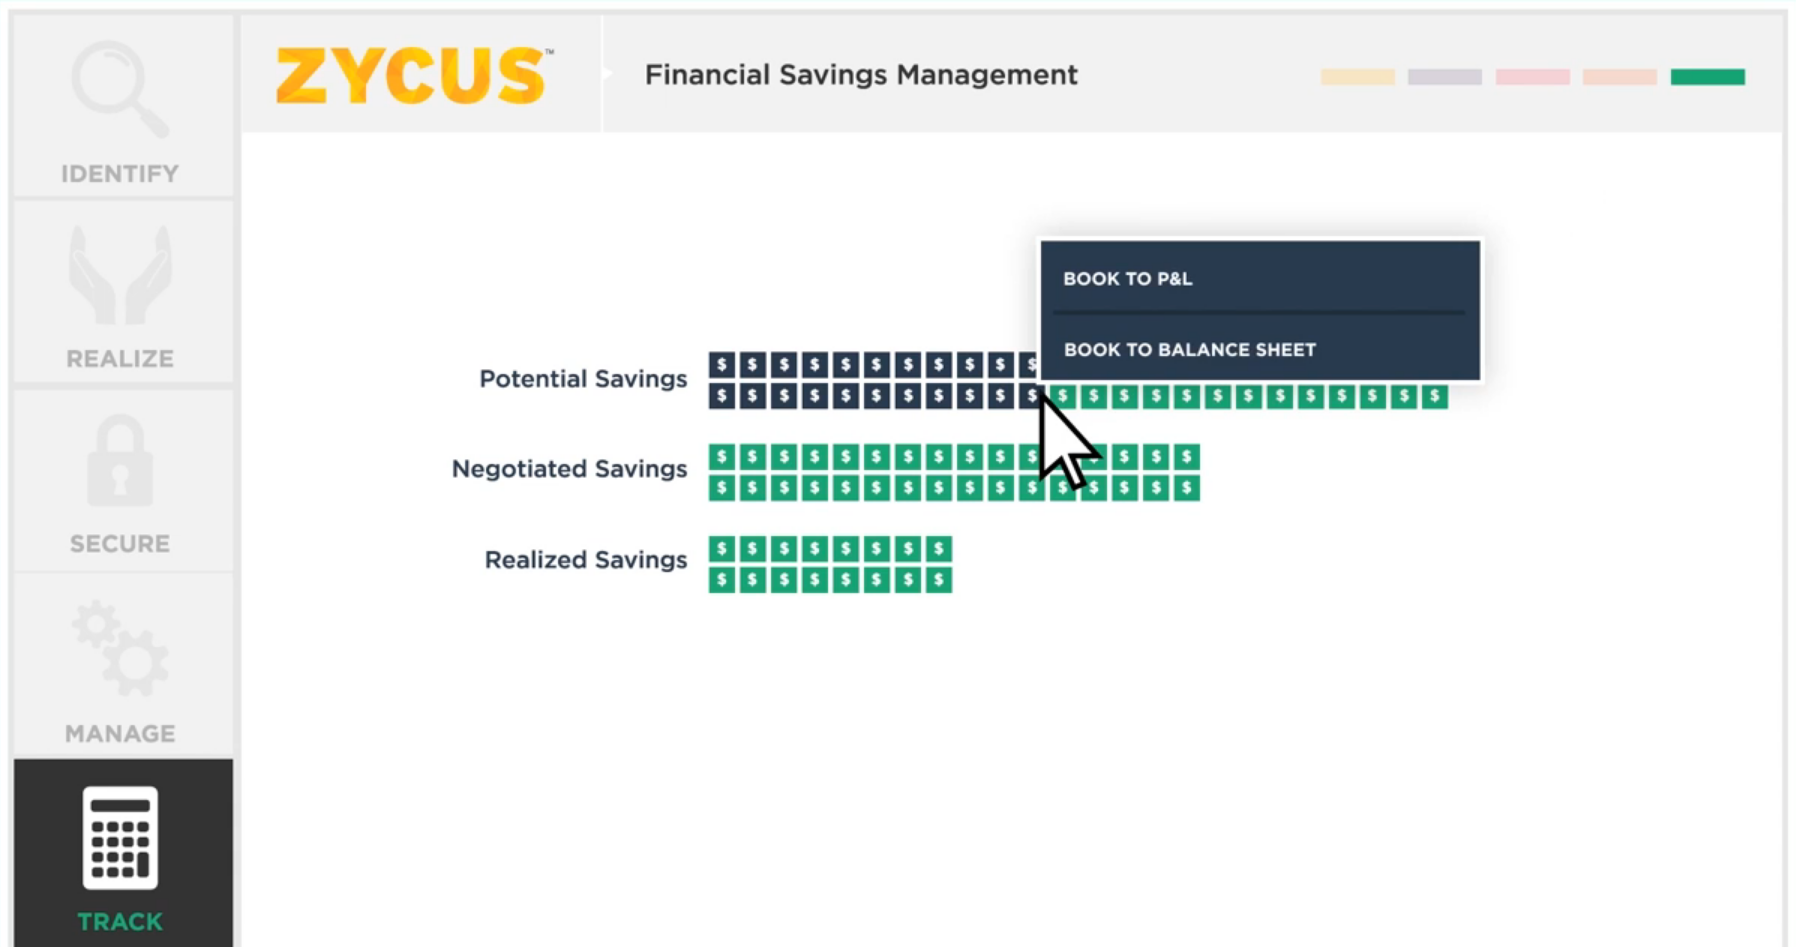 Zycus Procure-to-Pay Solution Software - Financial savings management